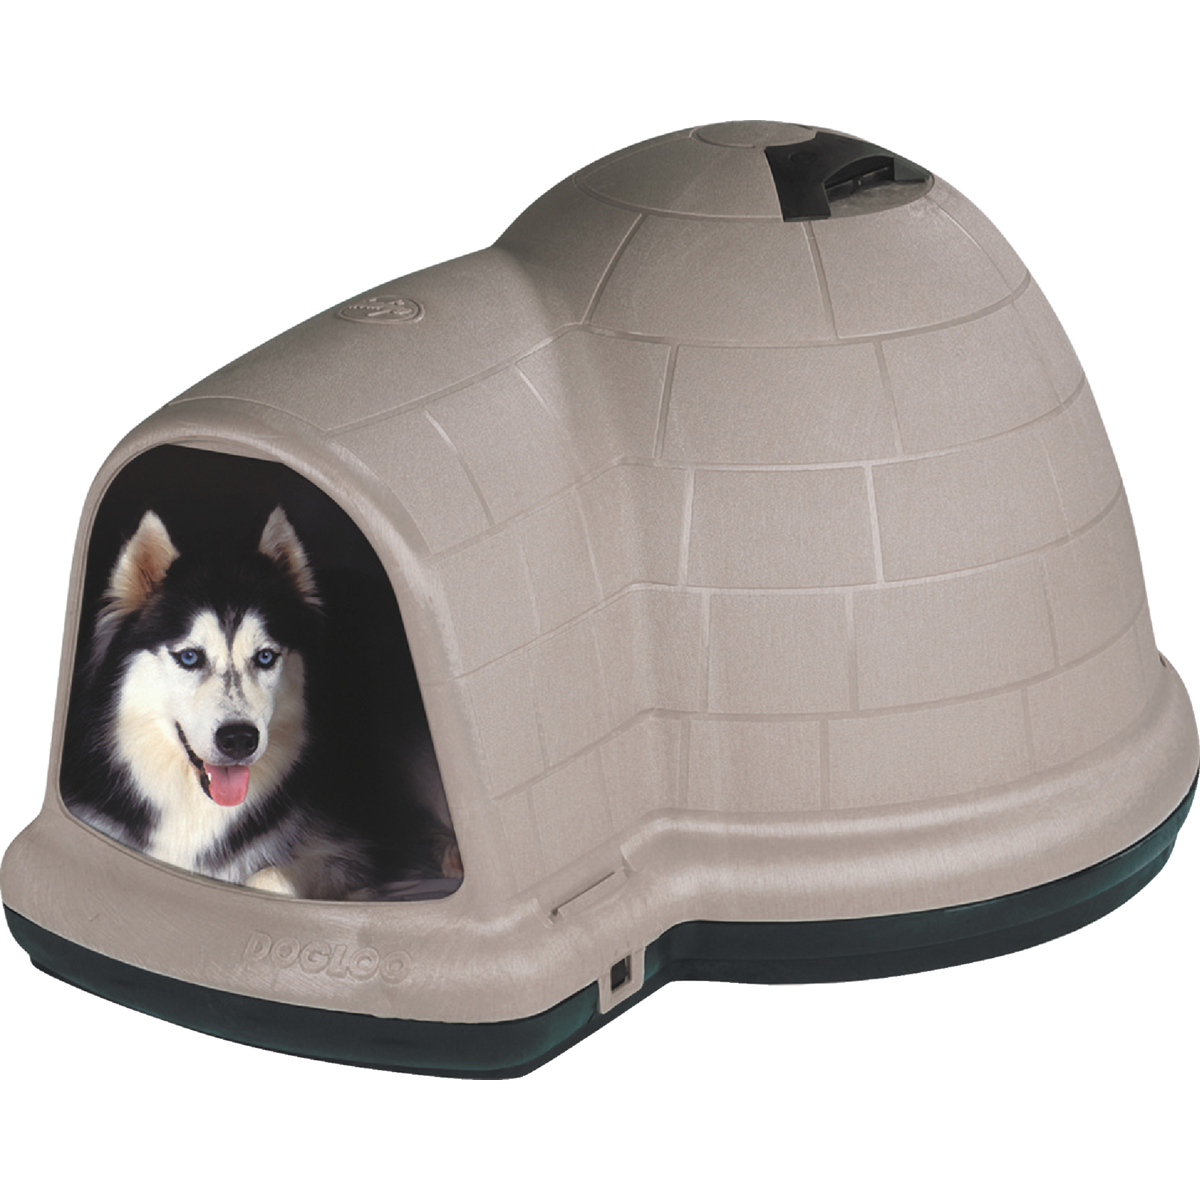 Dog Houses & Accessories